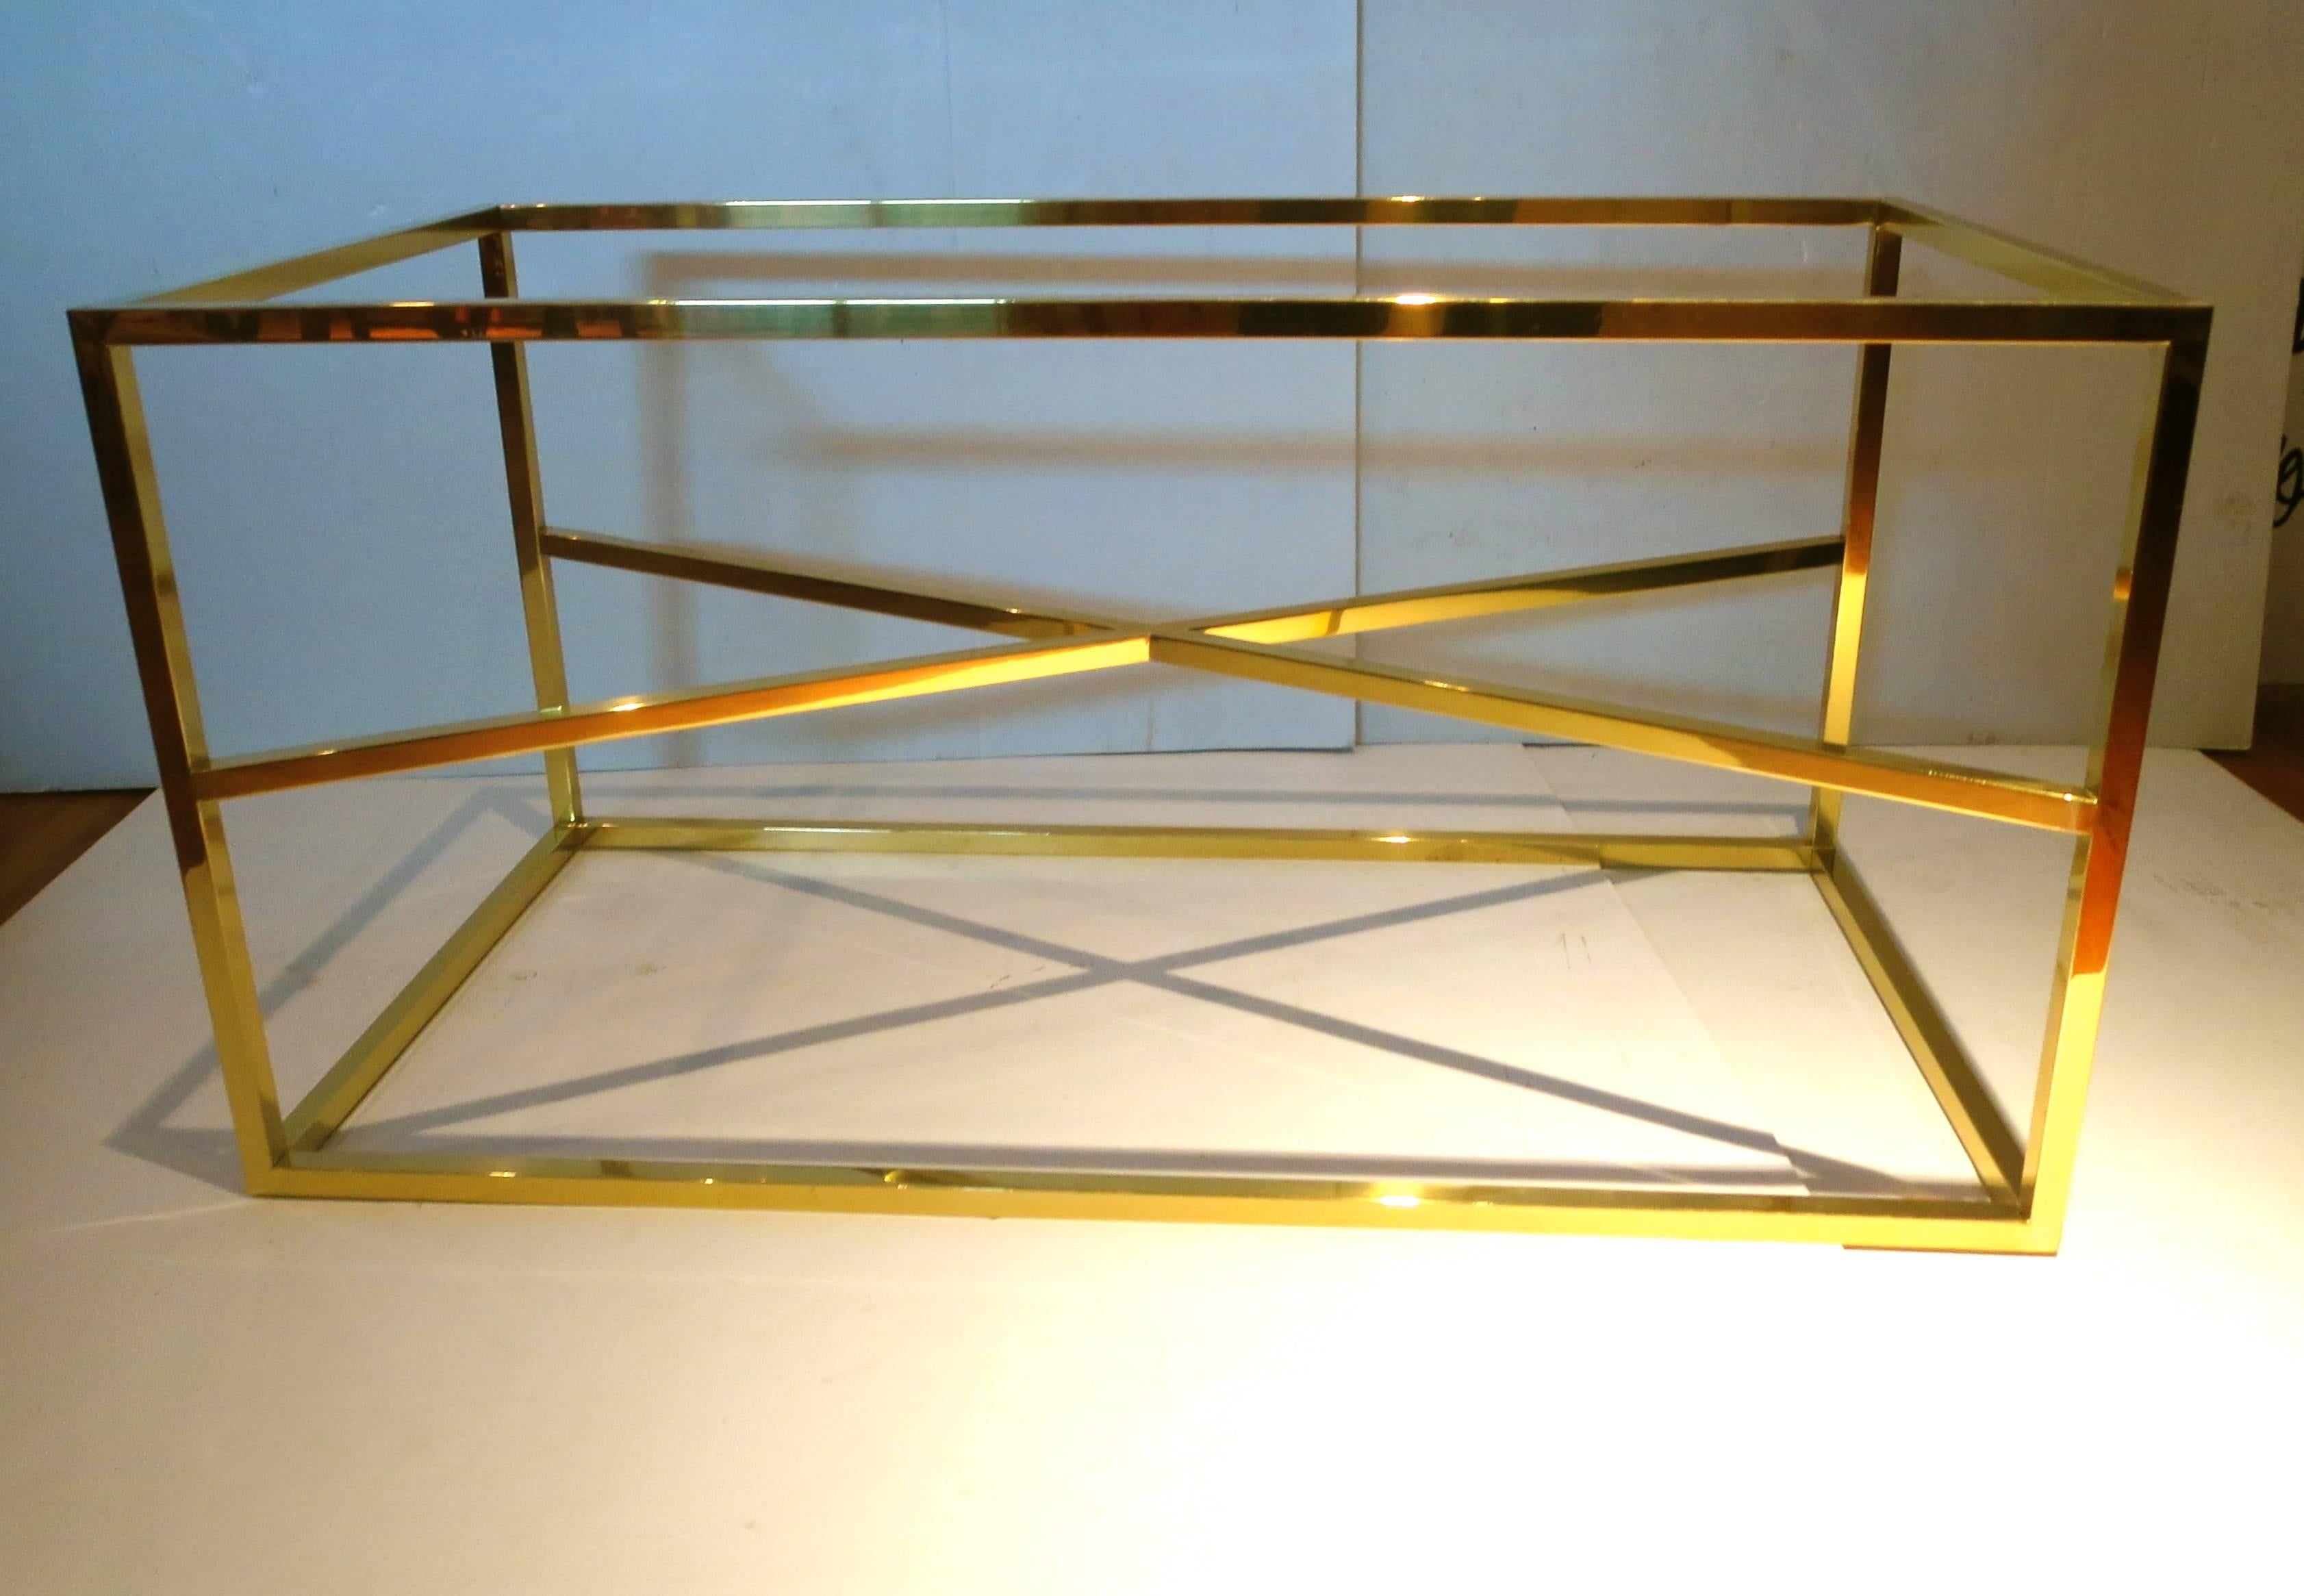 Beautiful X base coffee table base, made of solid brass square piping, great quality polished finish, invisible welding, solid and sturdy, can take a glass or marble top if desired, circa 1970s.